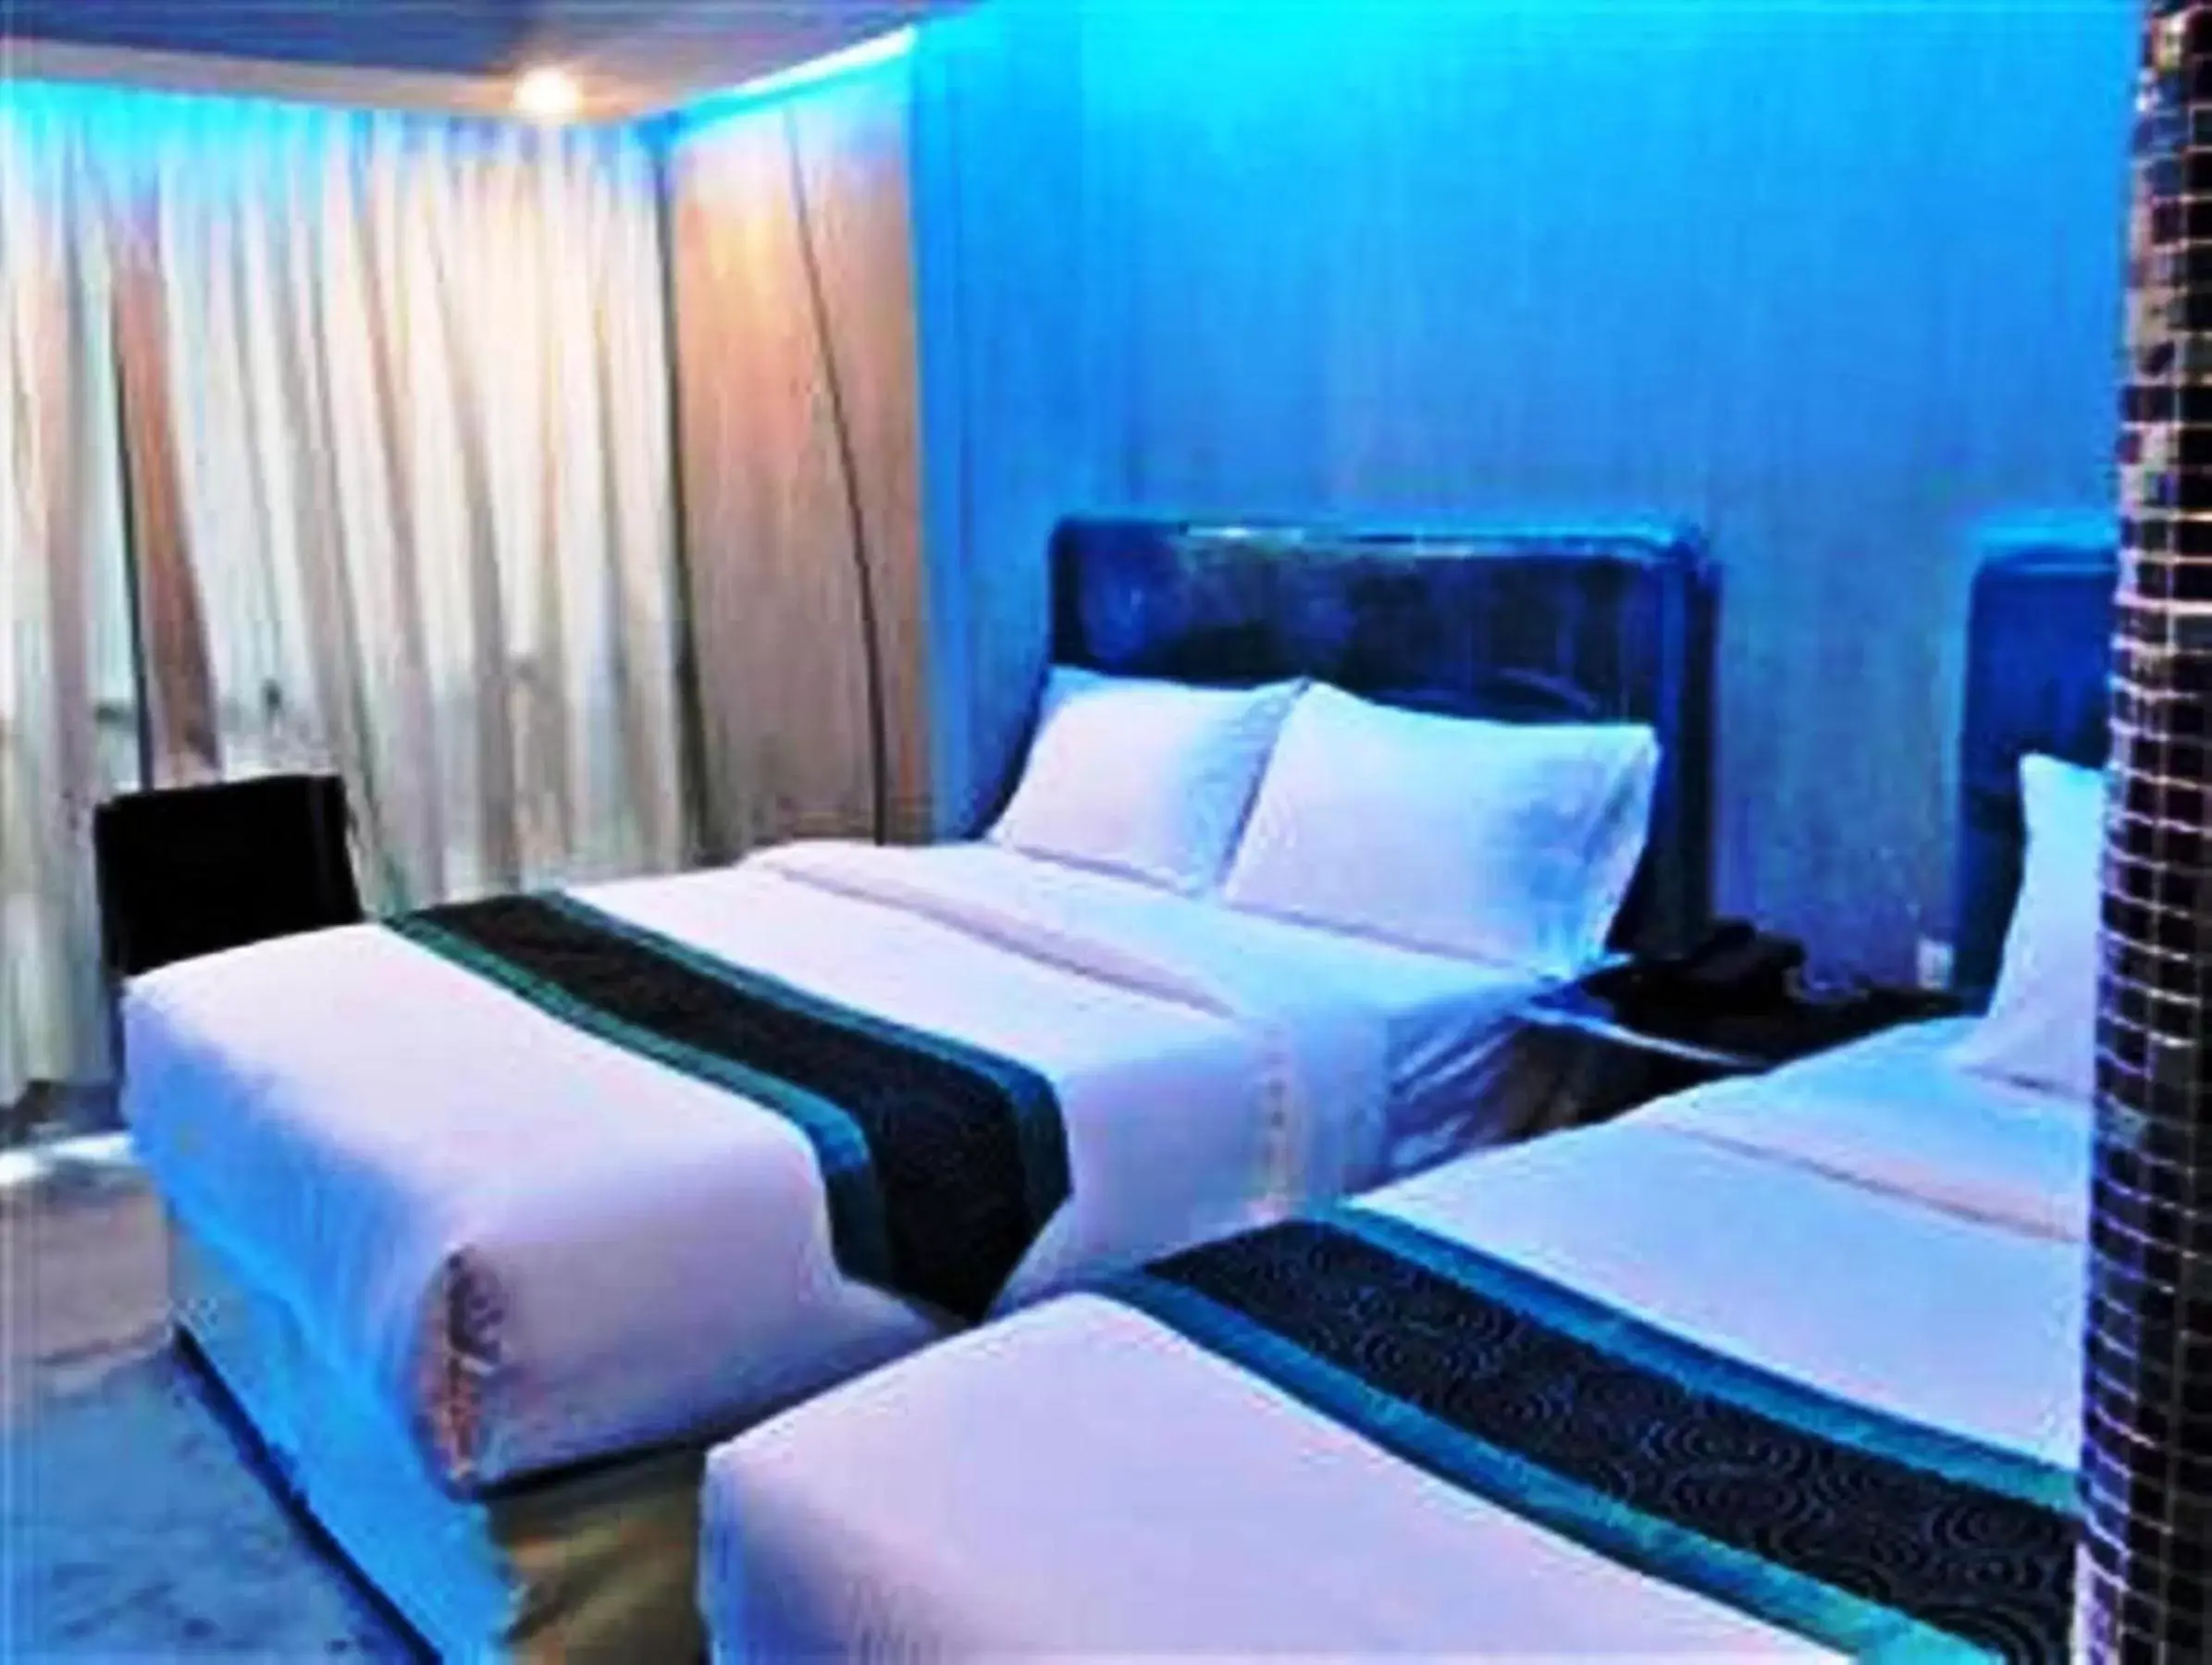 Bed in Blutique Hotel